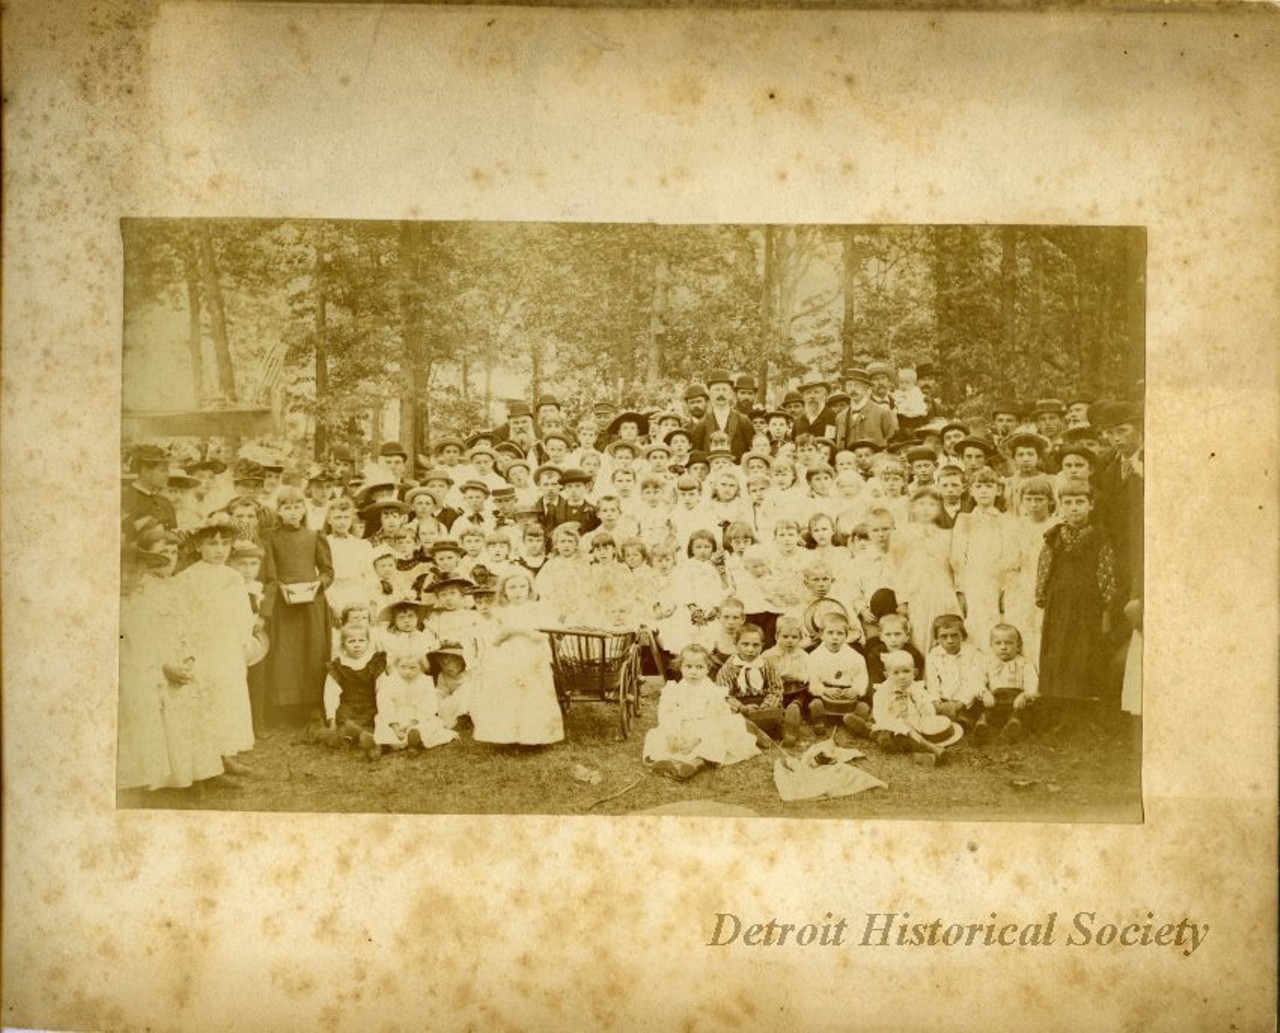 "One sepia-toned photograph of the congregation of St. James Lutheran Church in Detroit. The photo is mounted on white matte board and shows a large group of men, women, and children who are standing or seated in a park. All are well-dressed in Sunday attire. A grassy lawn is visible in the foreground and tall trees can be seen in the background. A middle-aged man with a moustache and bowler hat in the right center background may be church pastor, Rev. August G. Bergener, although he does not appear to be wearing a clerical collar. A handwritten note attached to the photo reads 'Probably a picture taken at the annual picnic at Clark Park. The group marched over to the park every year on the Fourth of July for this event in the early years.'"